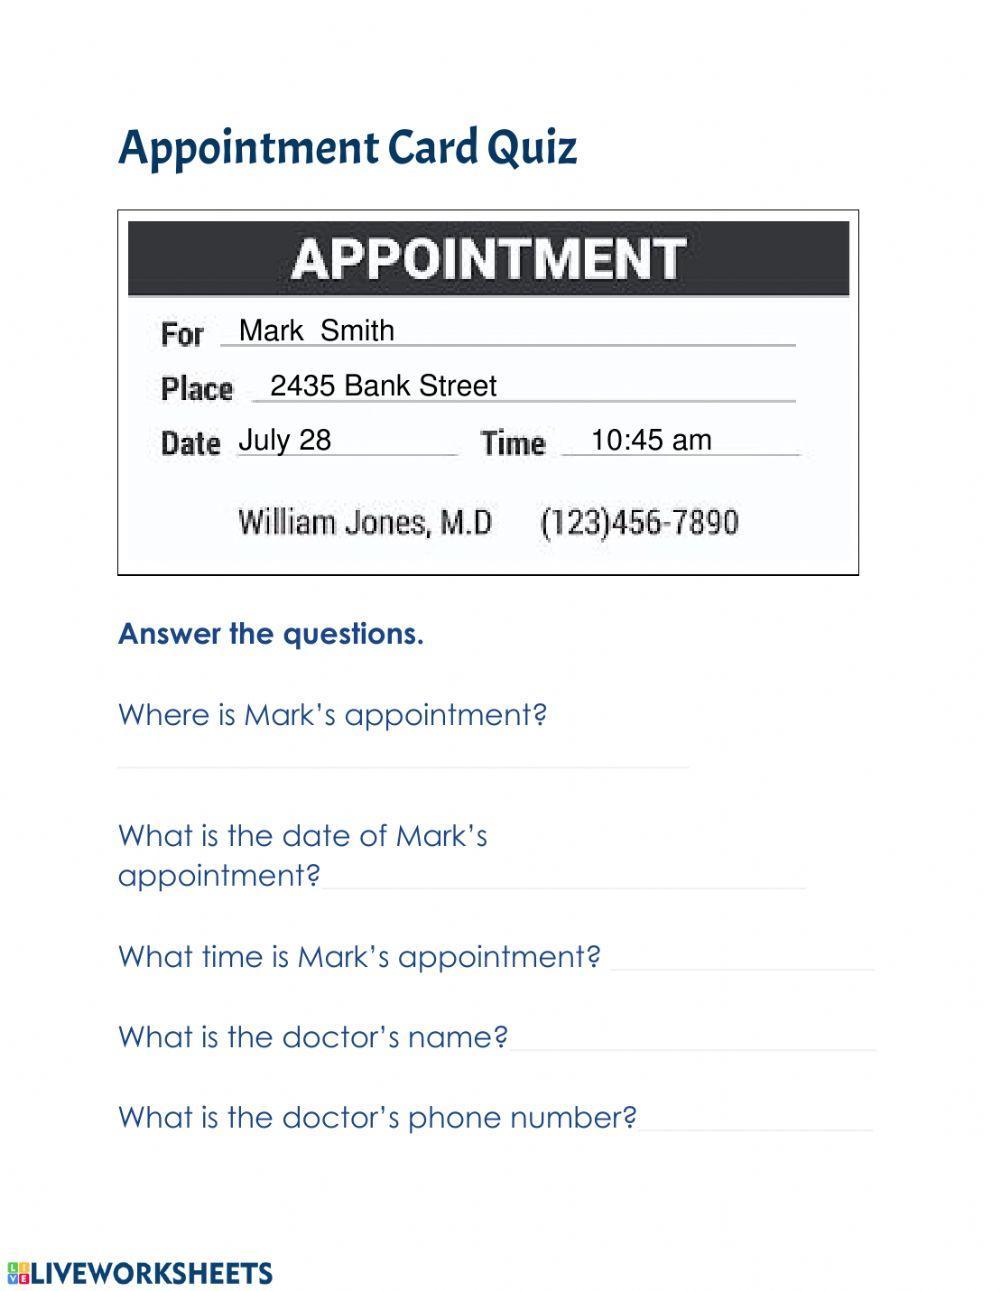 Appointment Card Quiz